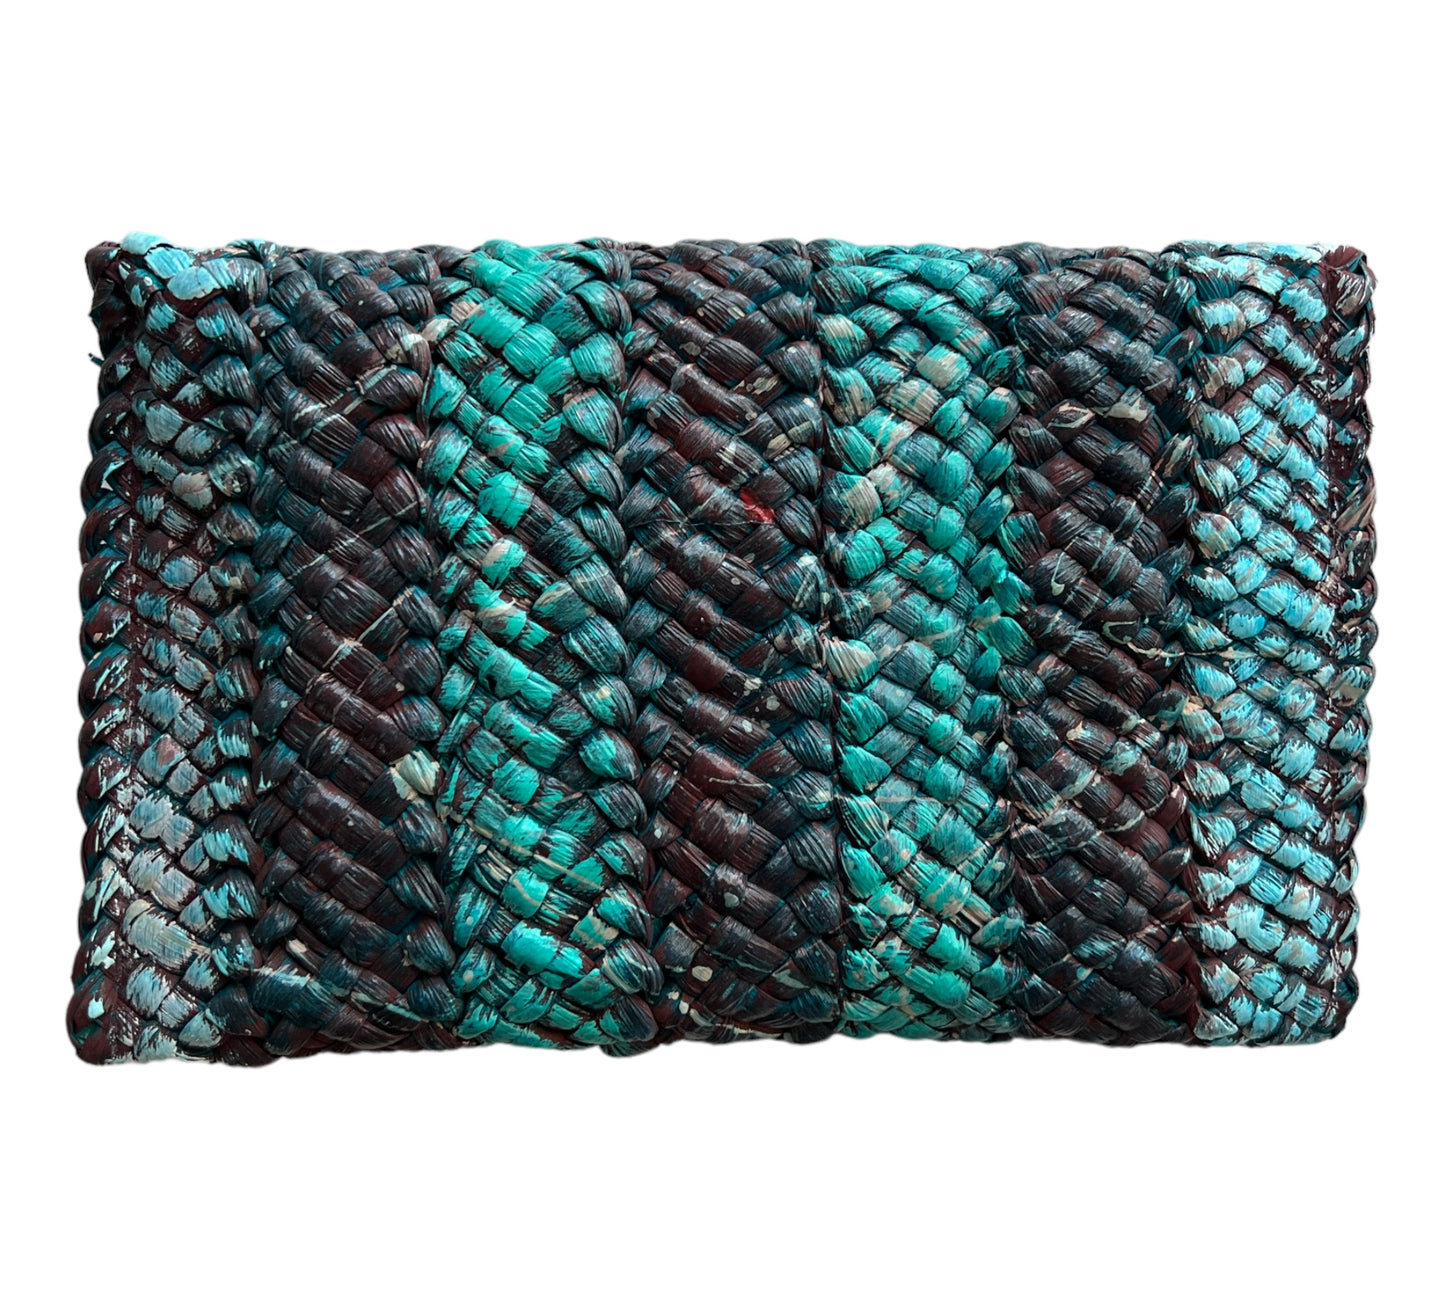 Turquoise Straw Clutch Envelope